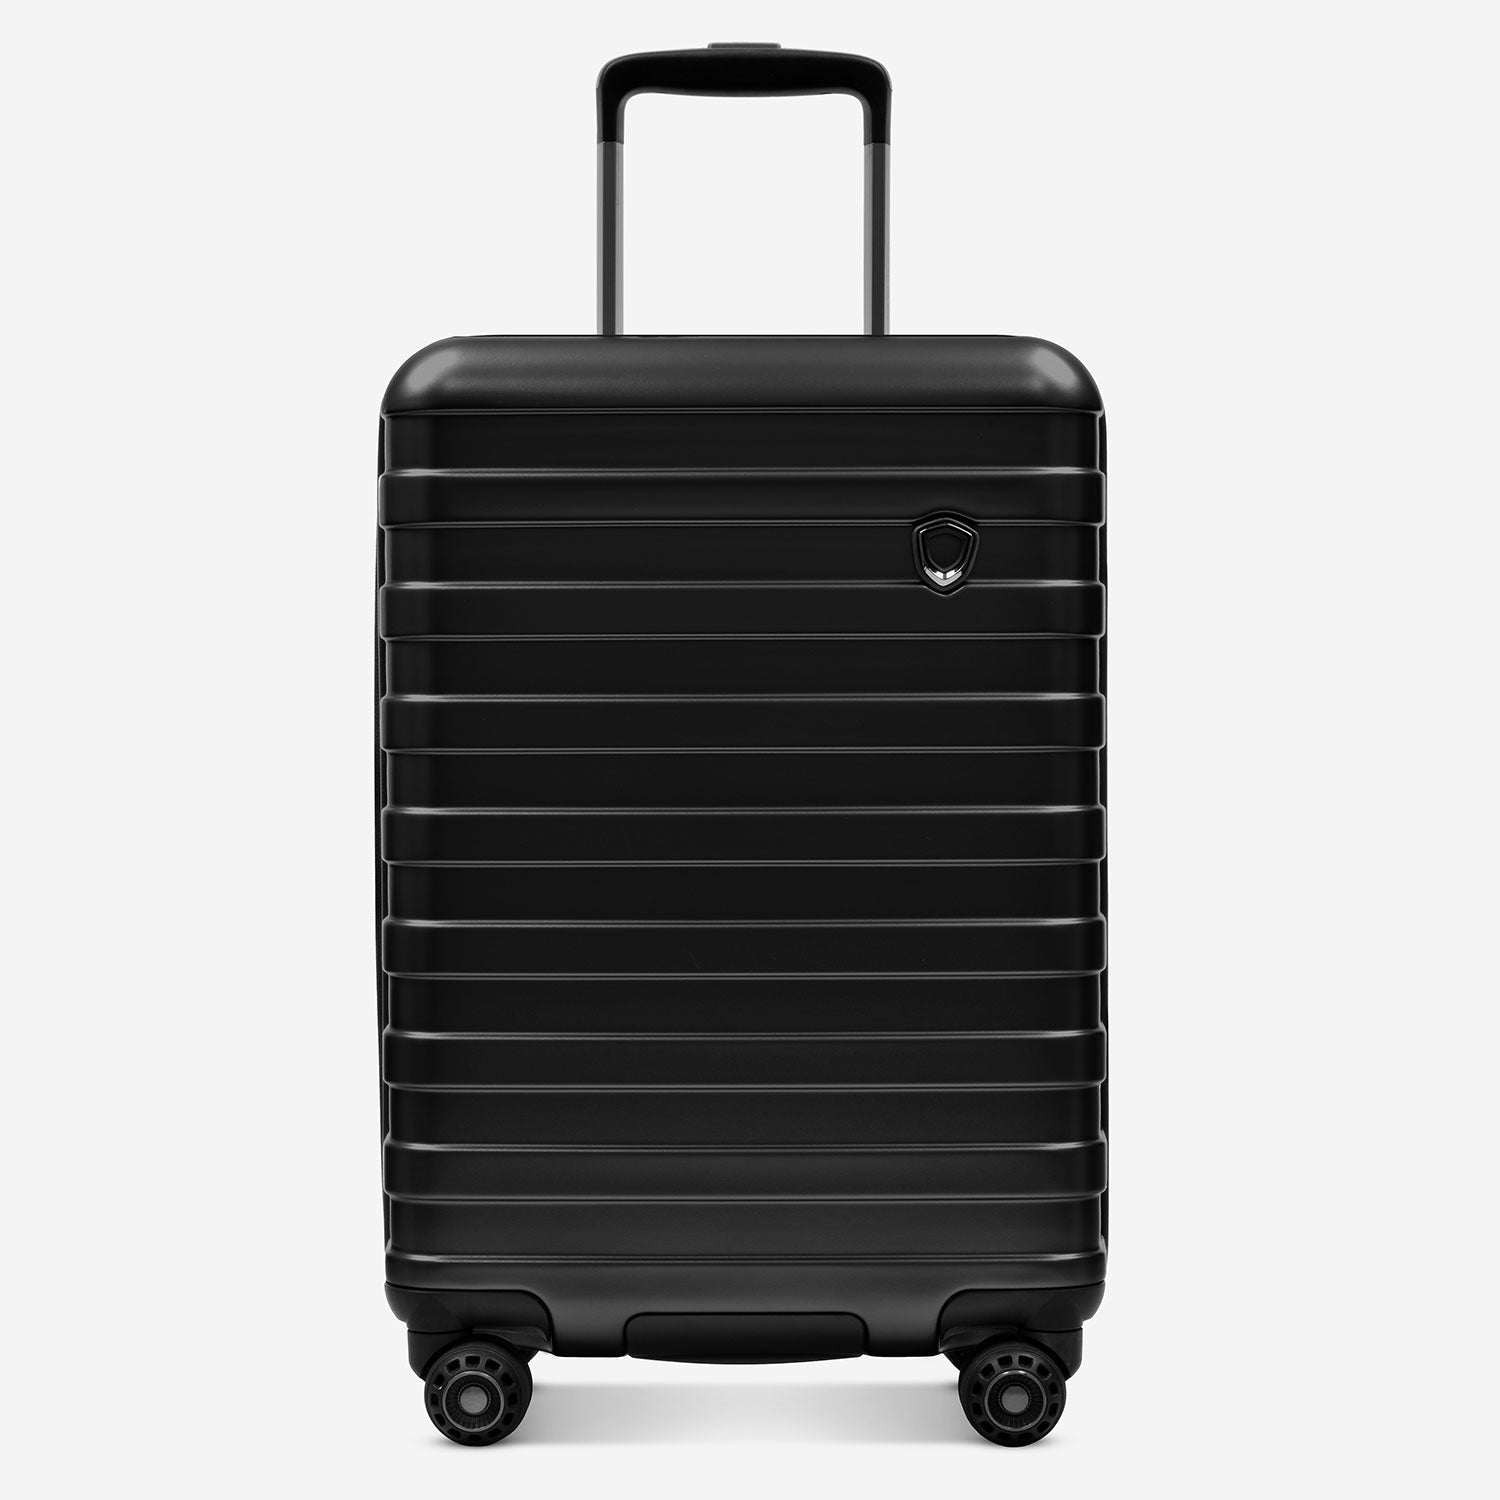 The Millennial Carry-On Spinner